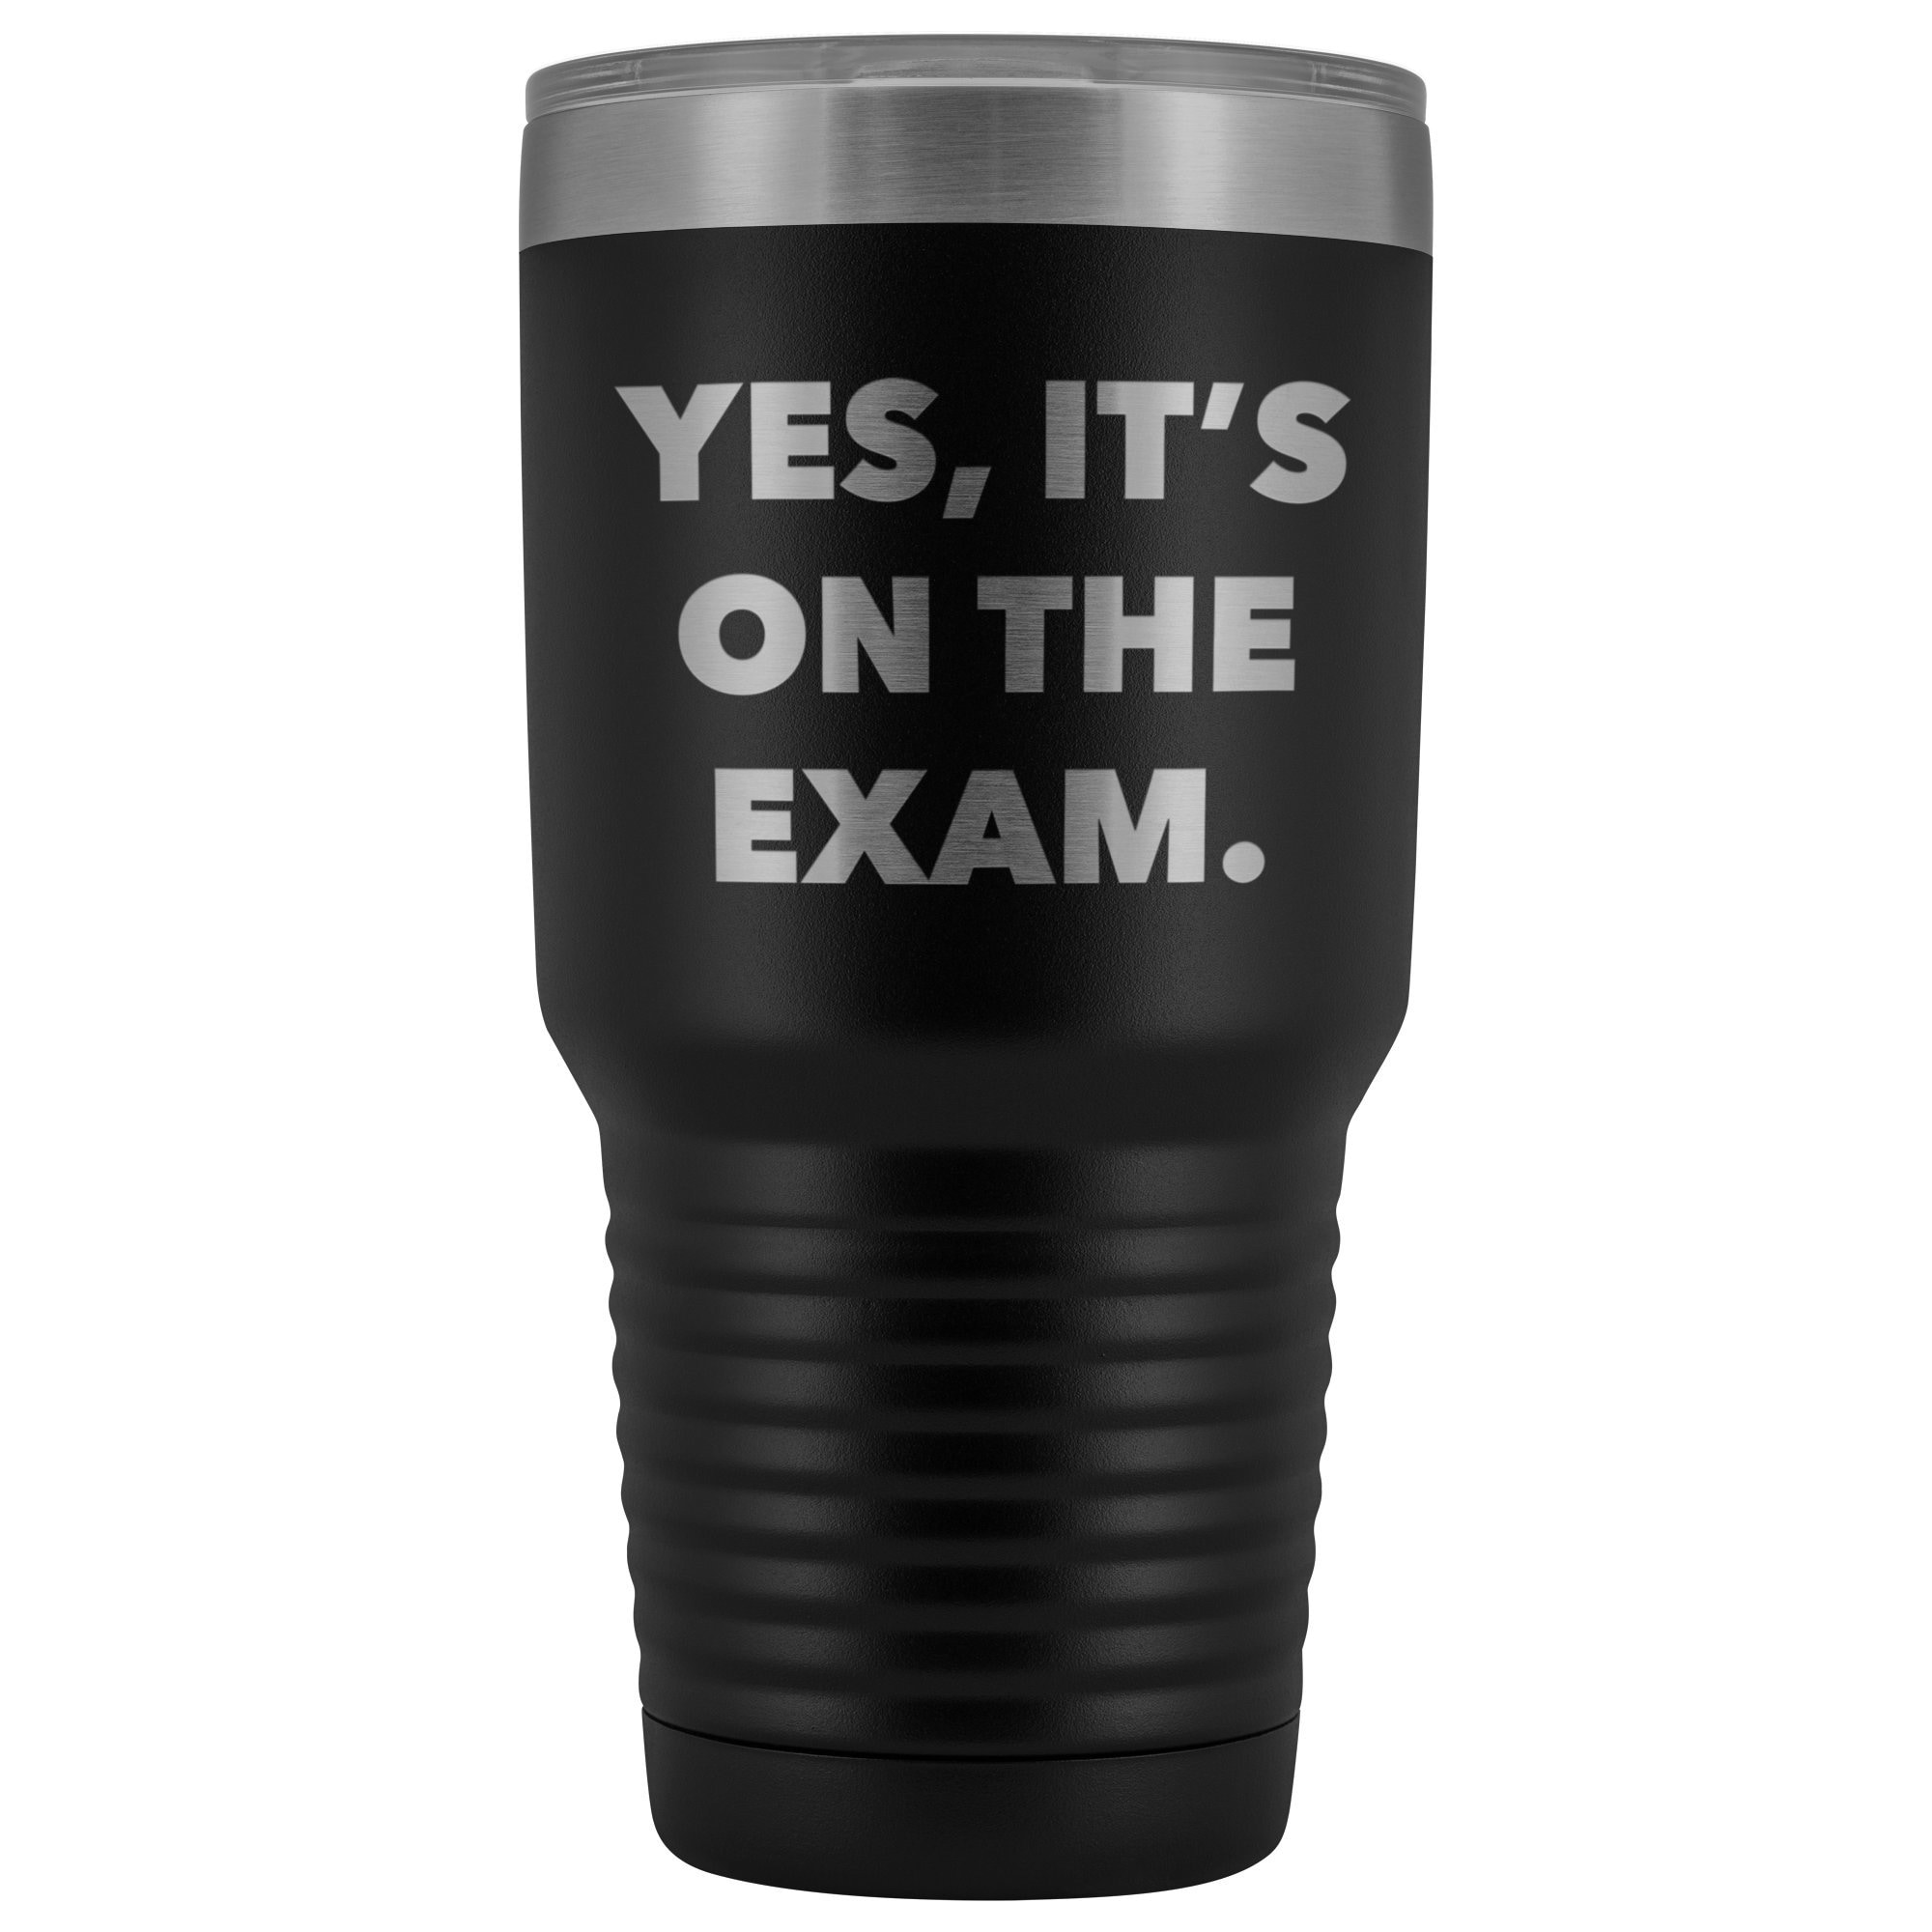 Funny Insulated Travel Mug Perfect for On-the-Go Professors